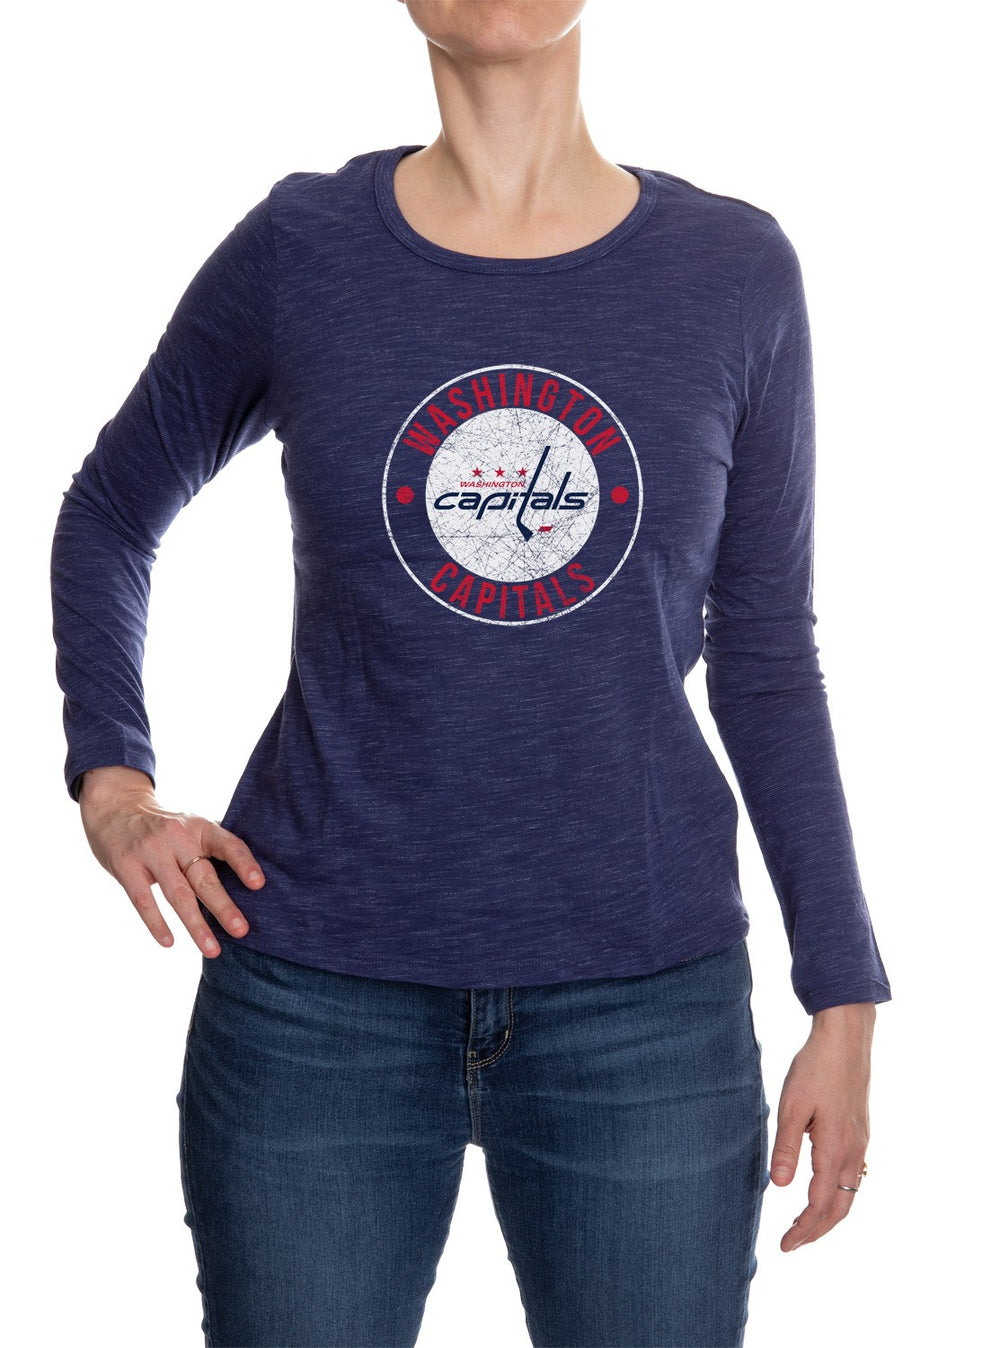 Washington Capitals Distressed Logo Long Sleeve Shirt for Women in Blue Front View